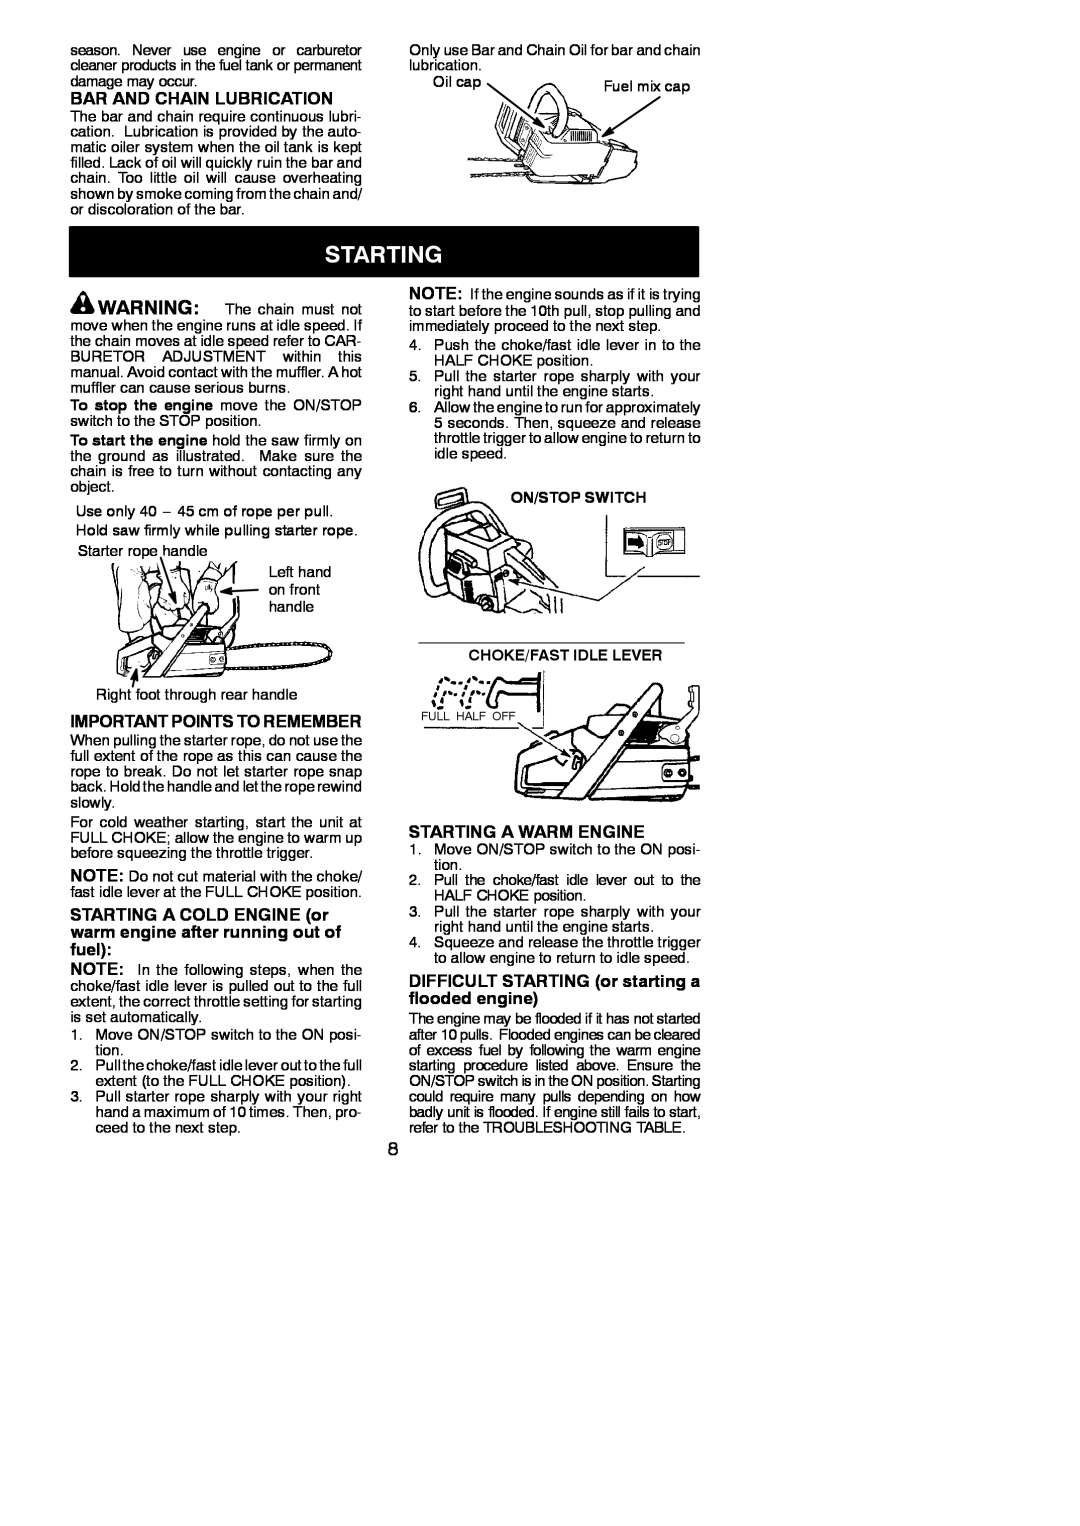 Husqvarna 137, 142 instruction manual Bar And Chain Lubrication, Important Points To Remember, Starting A Warm Engine 